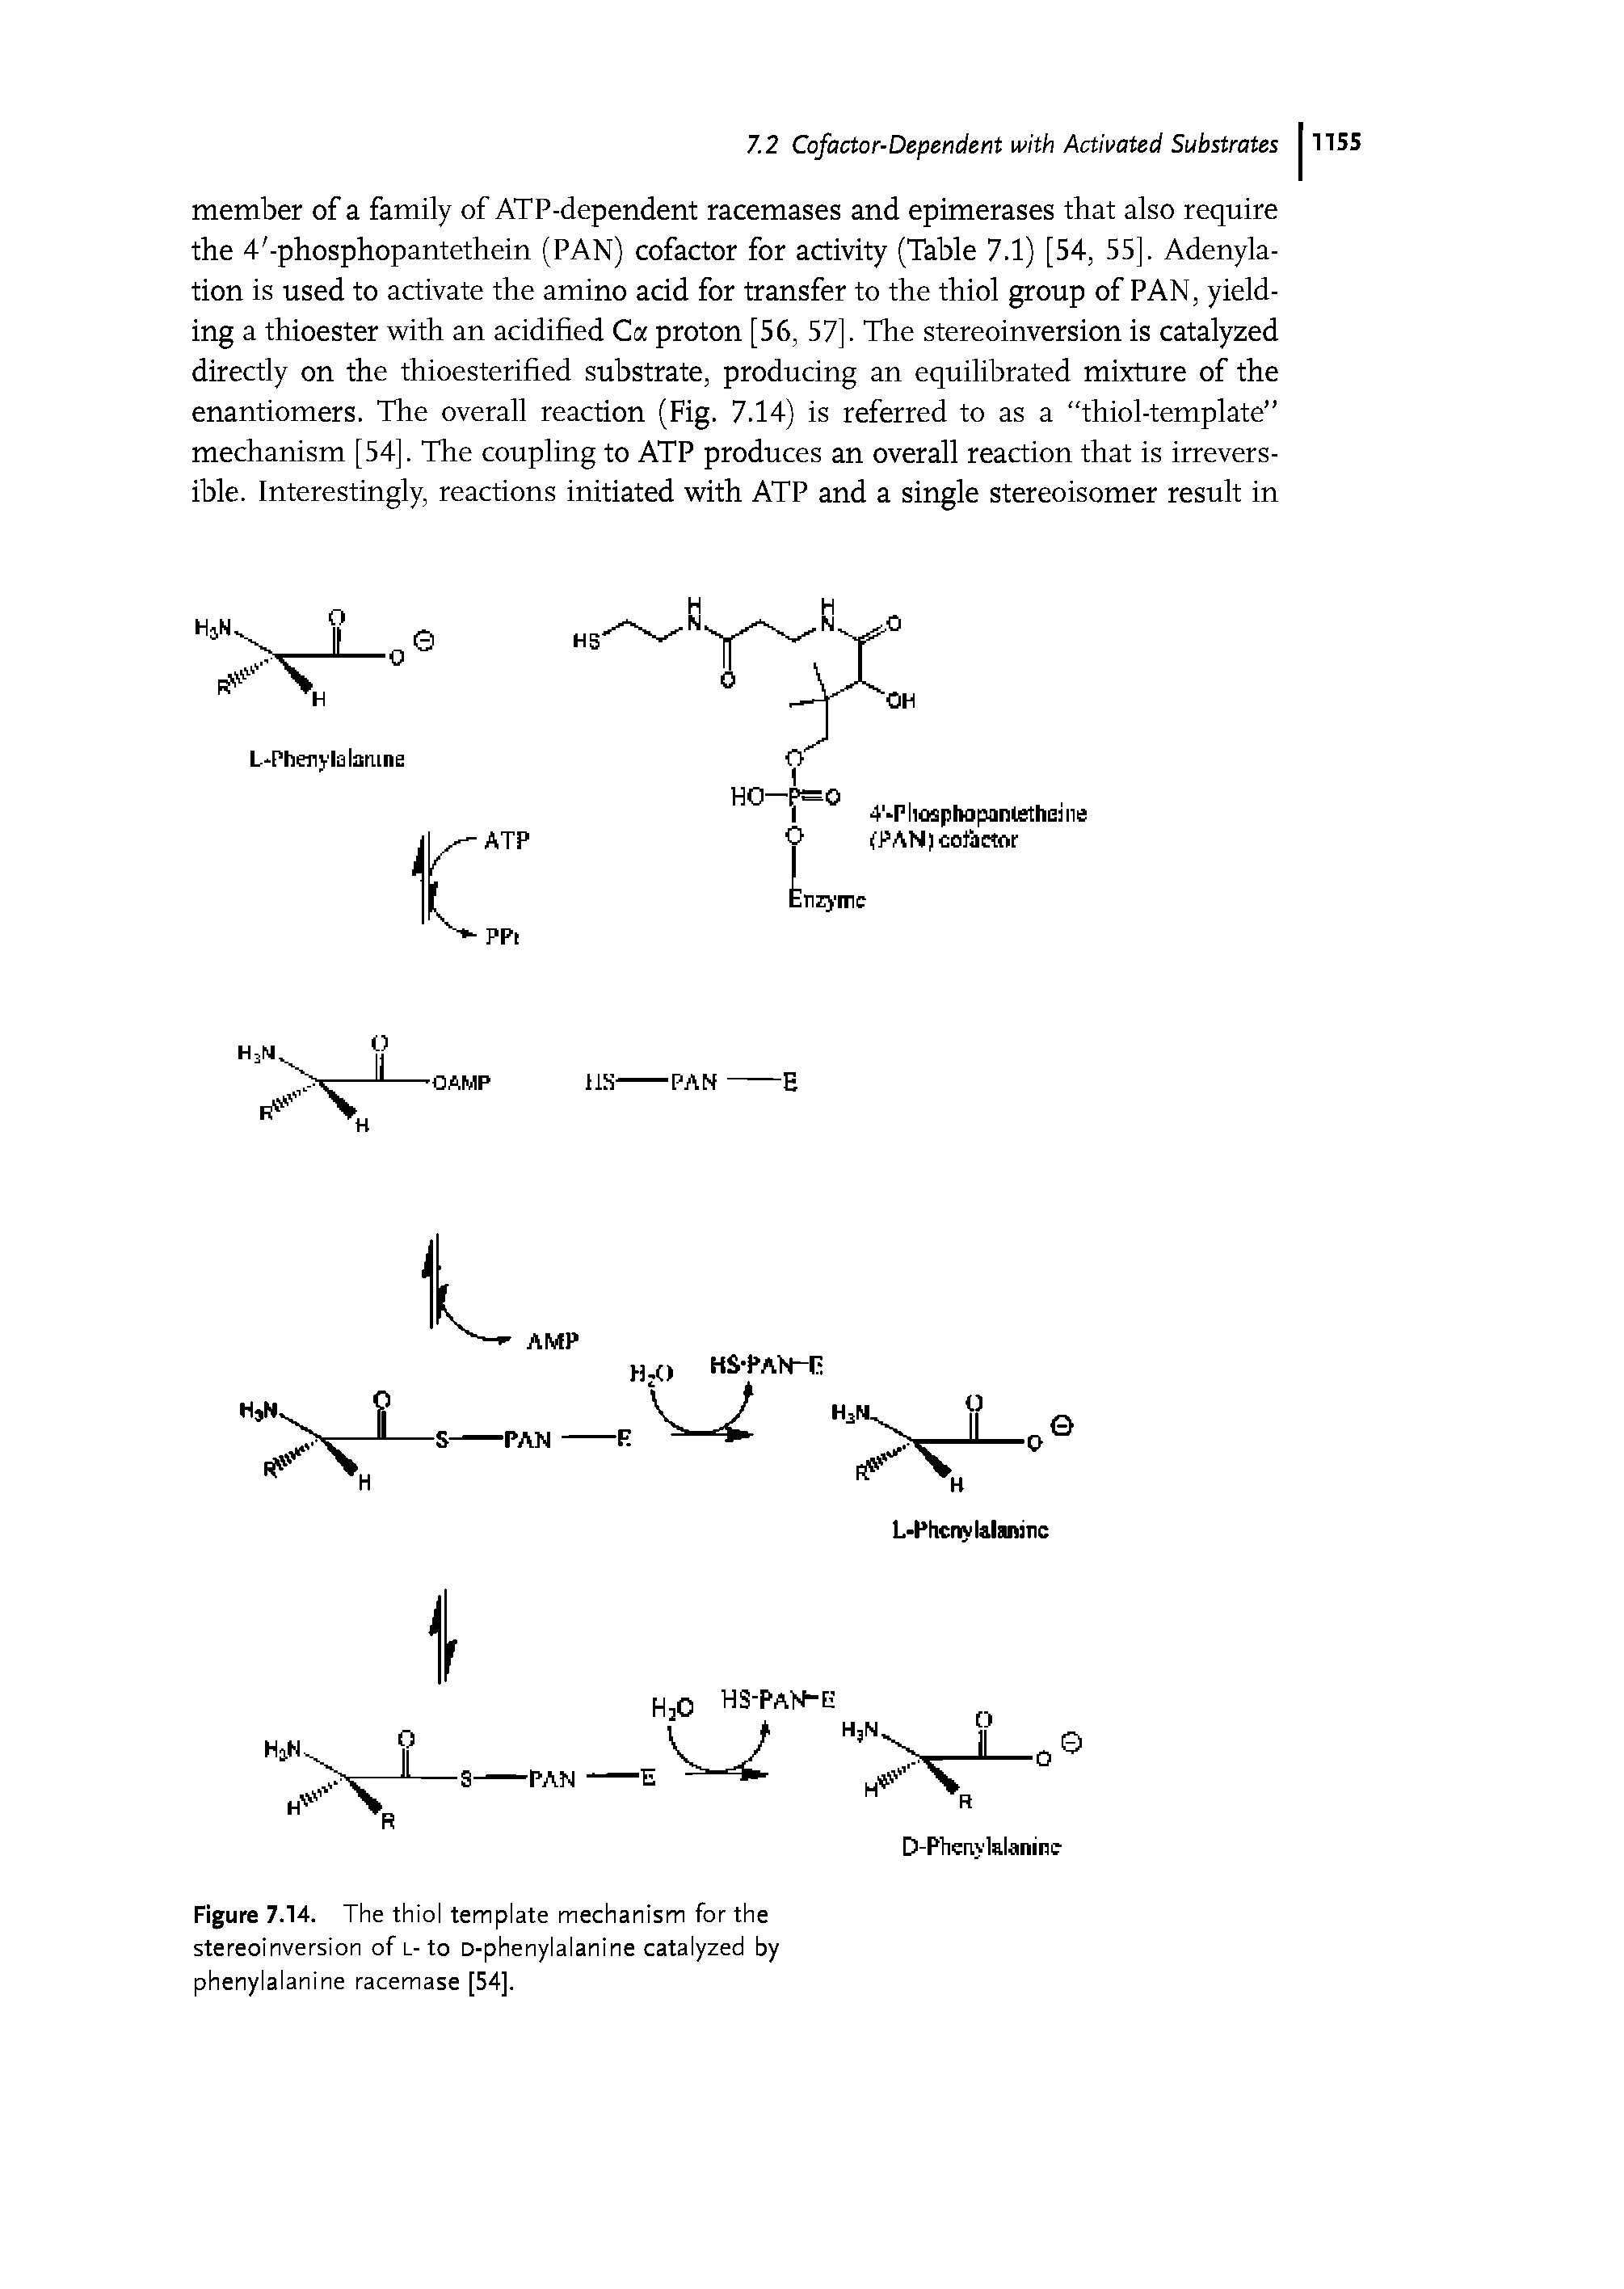 Figure 7.14. The thiol template mechanism for the stereoinversion of l-to D-phenylalanine catalyzed by phenylalanine racemase [54].